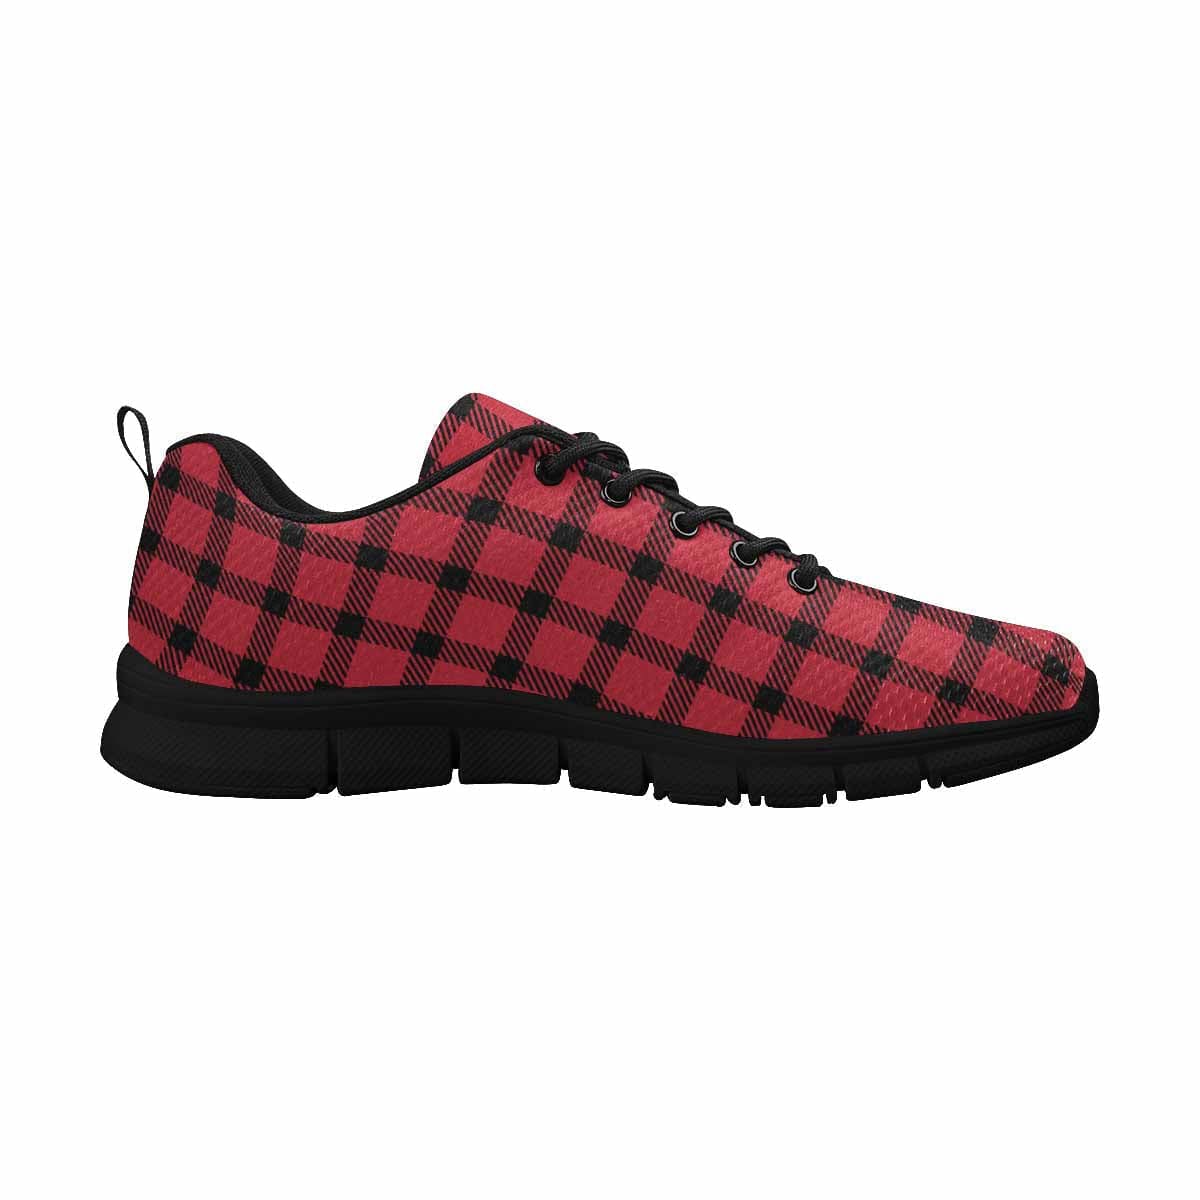 Sneakers For Men Buffalo Plaid Red And Black - Running Shoes Dg838 - Mens |